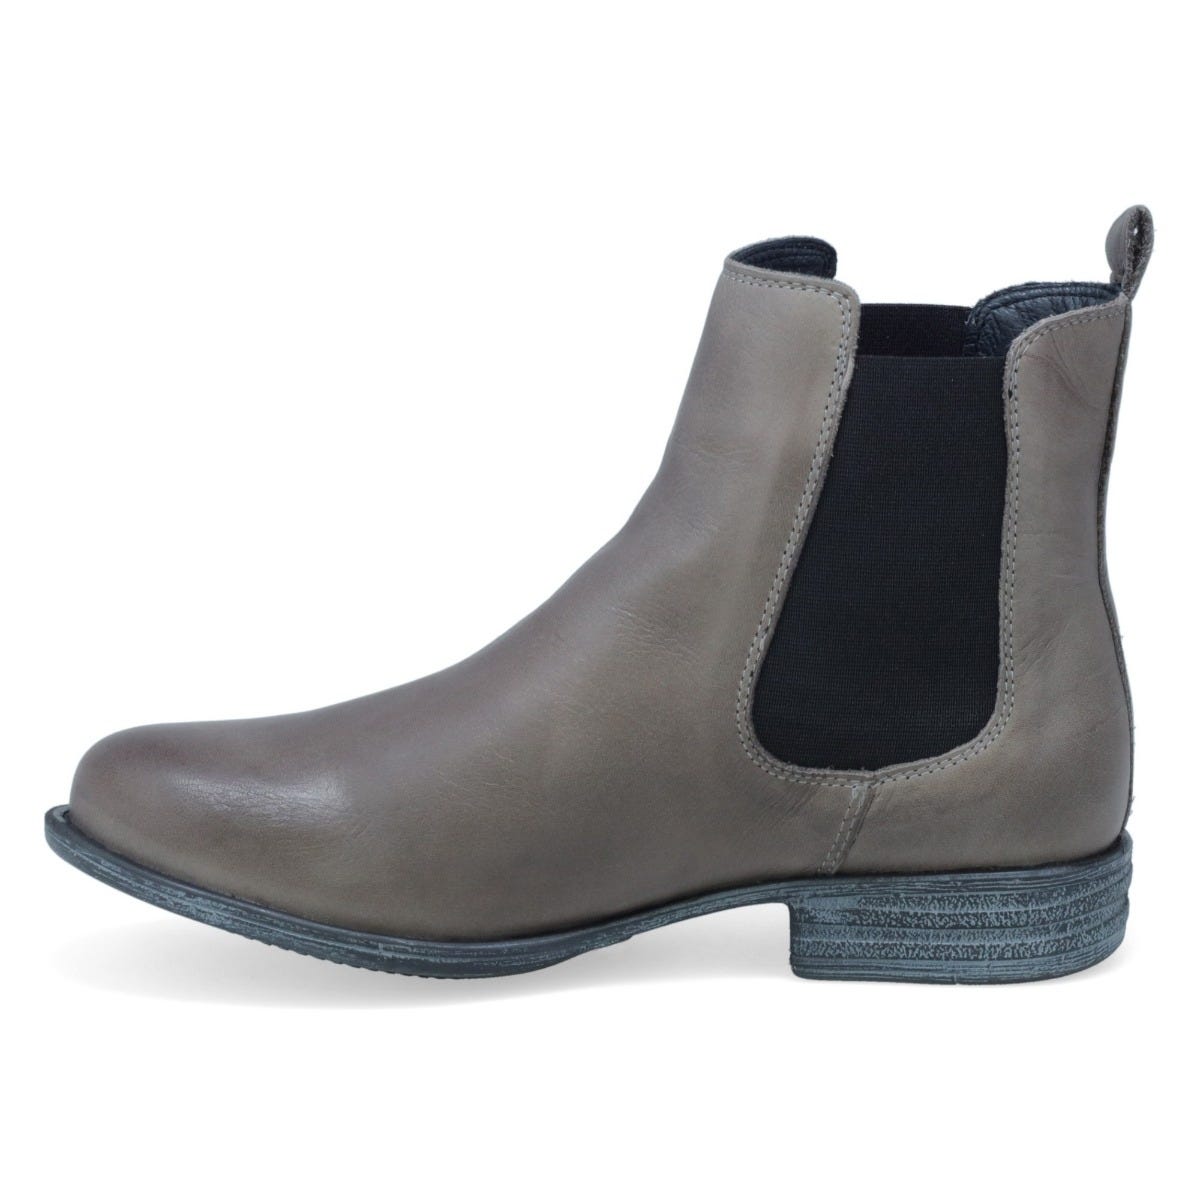 Inner side view of the miz mooz lewis bootie in the color graphite/grey. This flat bootie has black elastic gores on the side and a pull tab on the back.